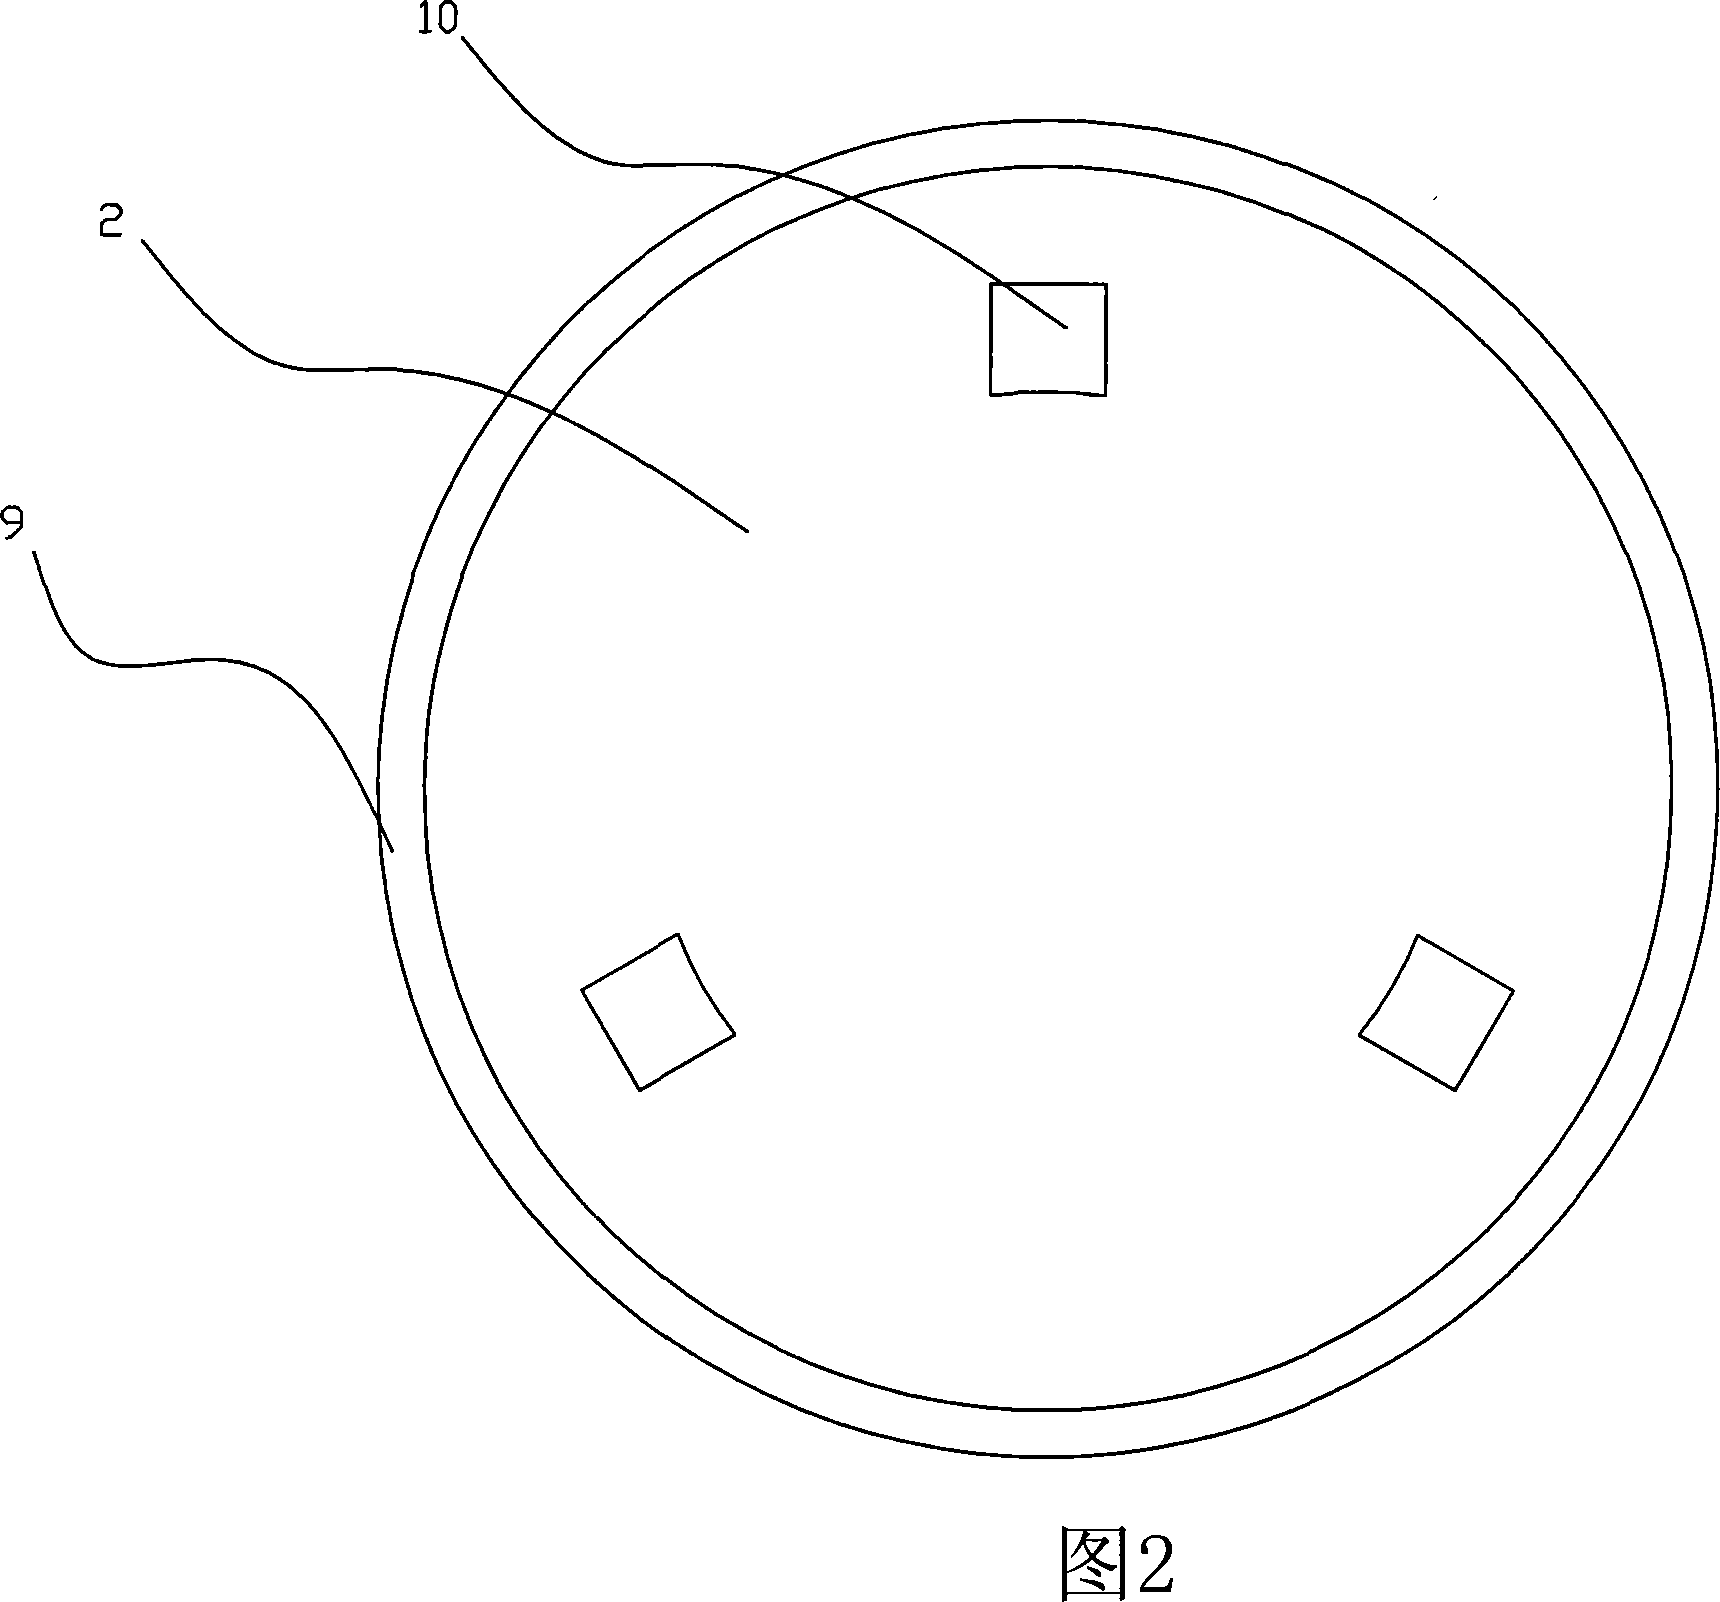 Process for boiling a plurality of steamed rice together with other materials and the arrangement thereof